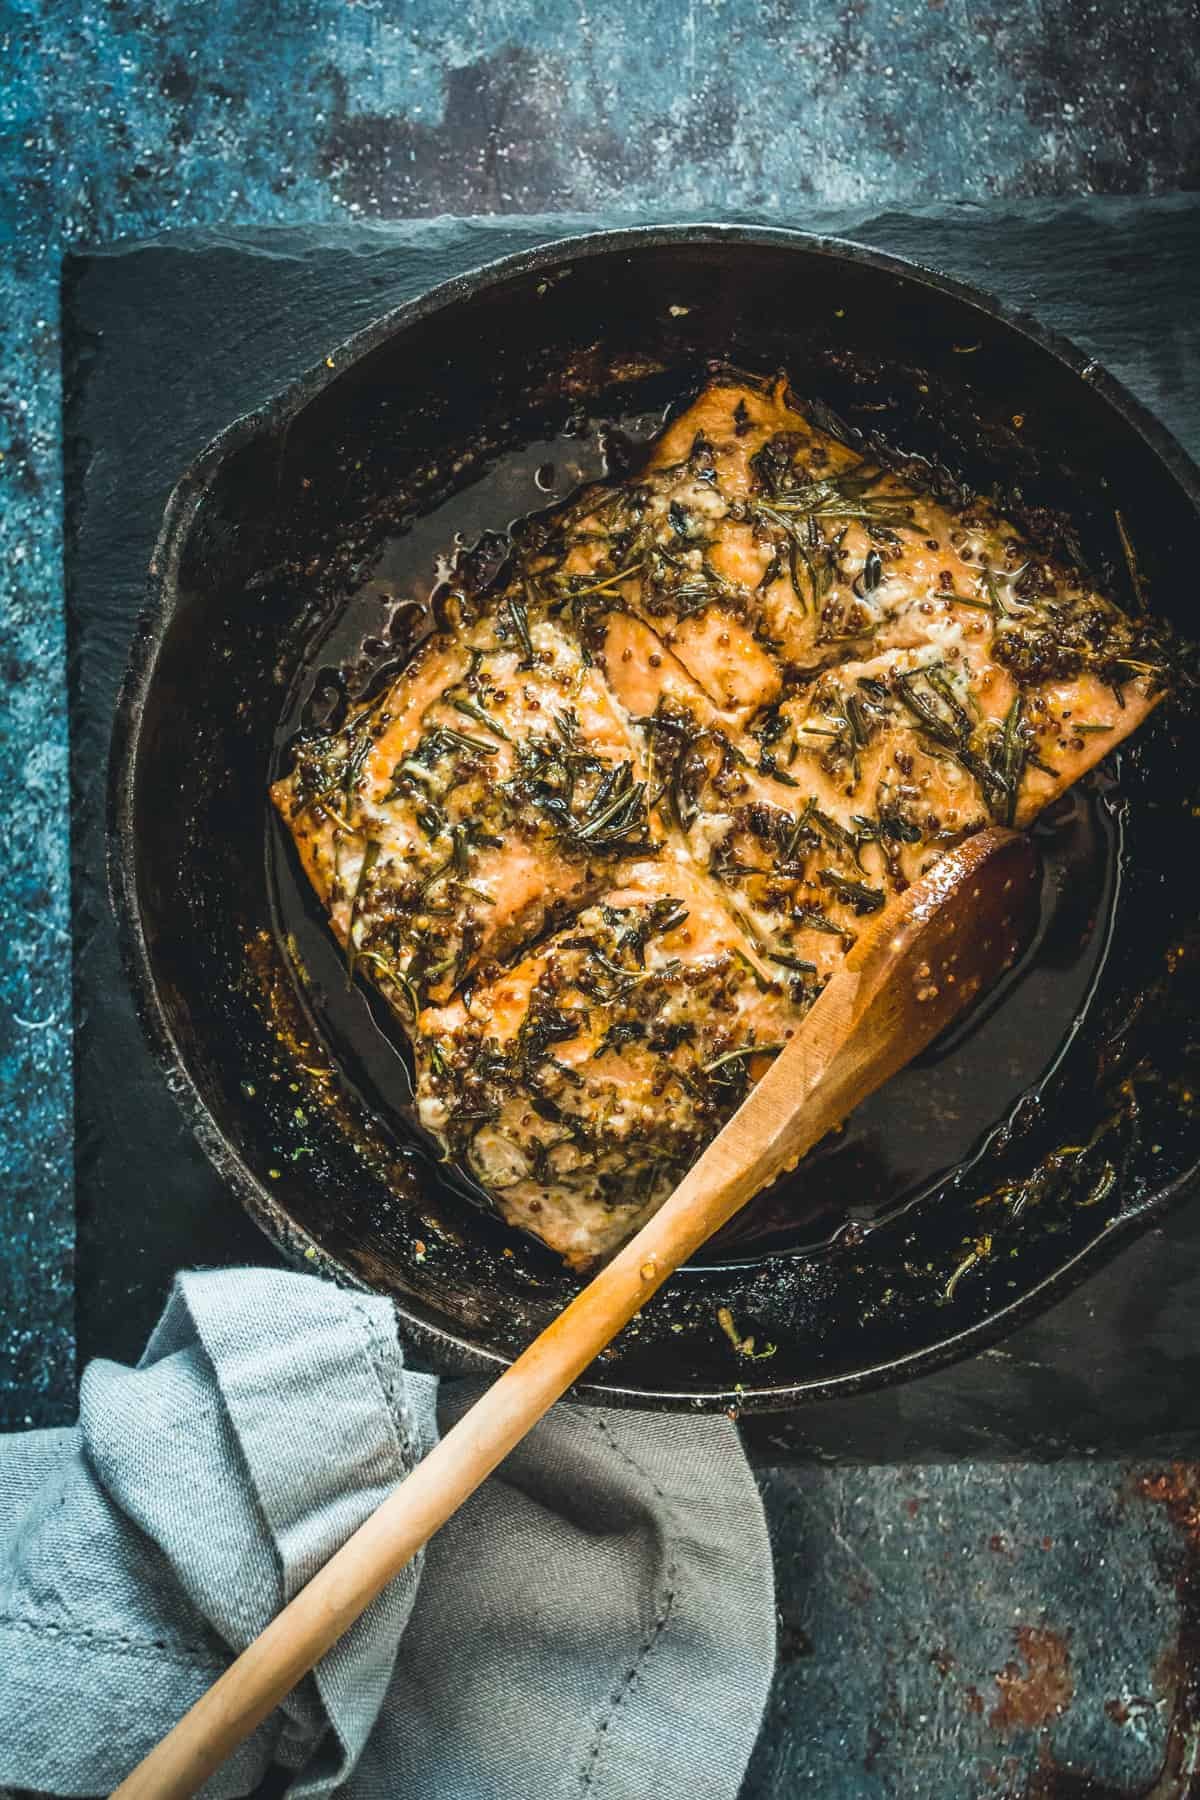 Cast-iron pan-fried sockeye salmon with mustard, honey and wild herbs : At the Immigrant's Table